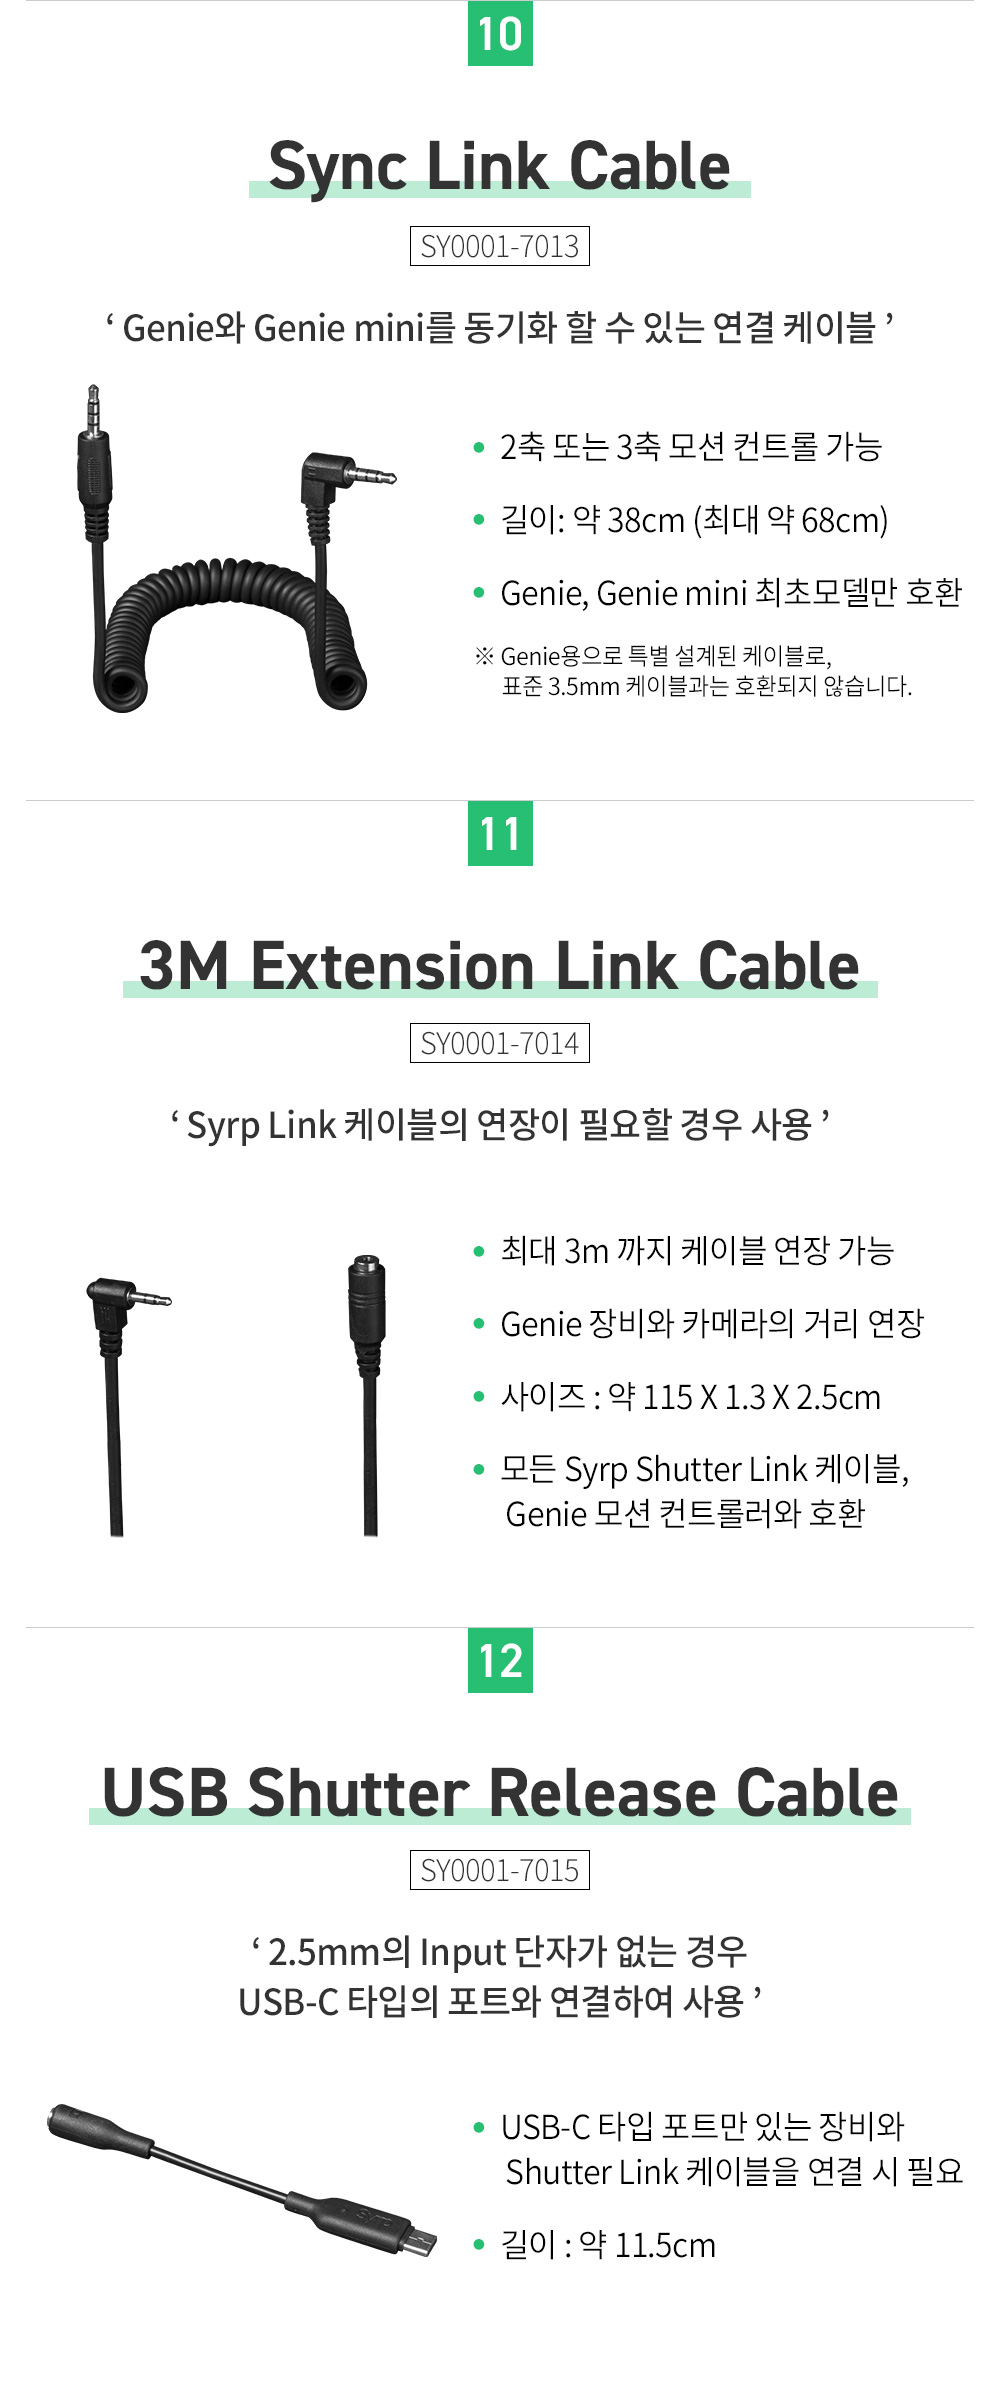 3m Shutter Link Cable Extension - SY0001-7014